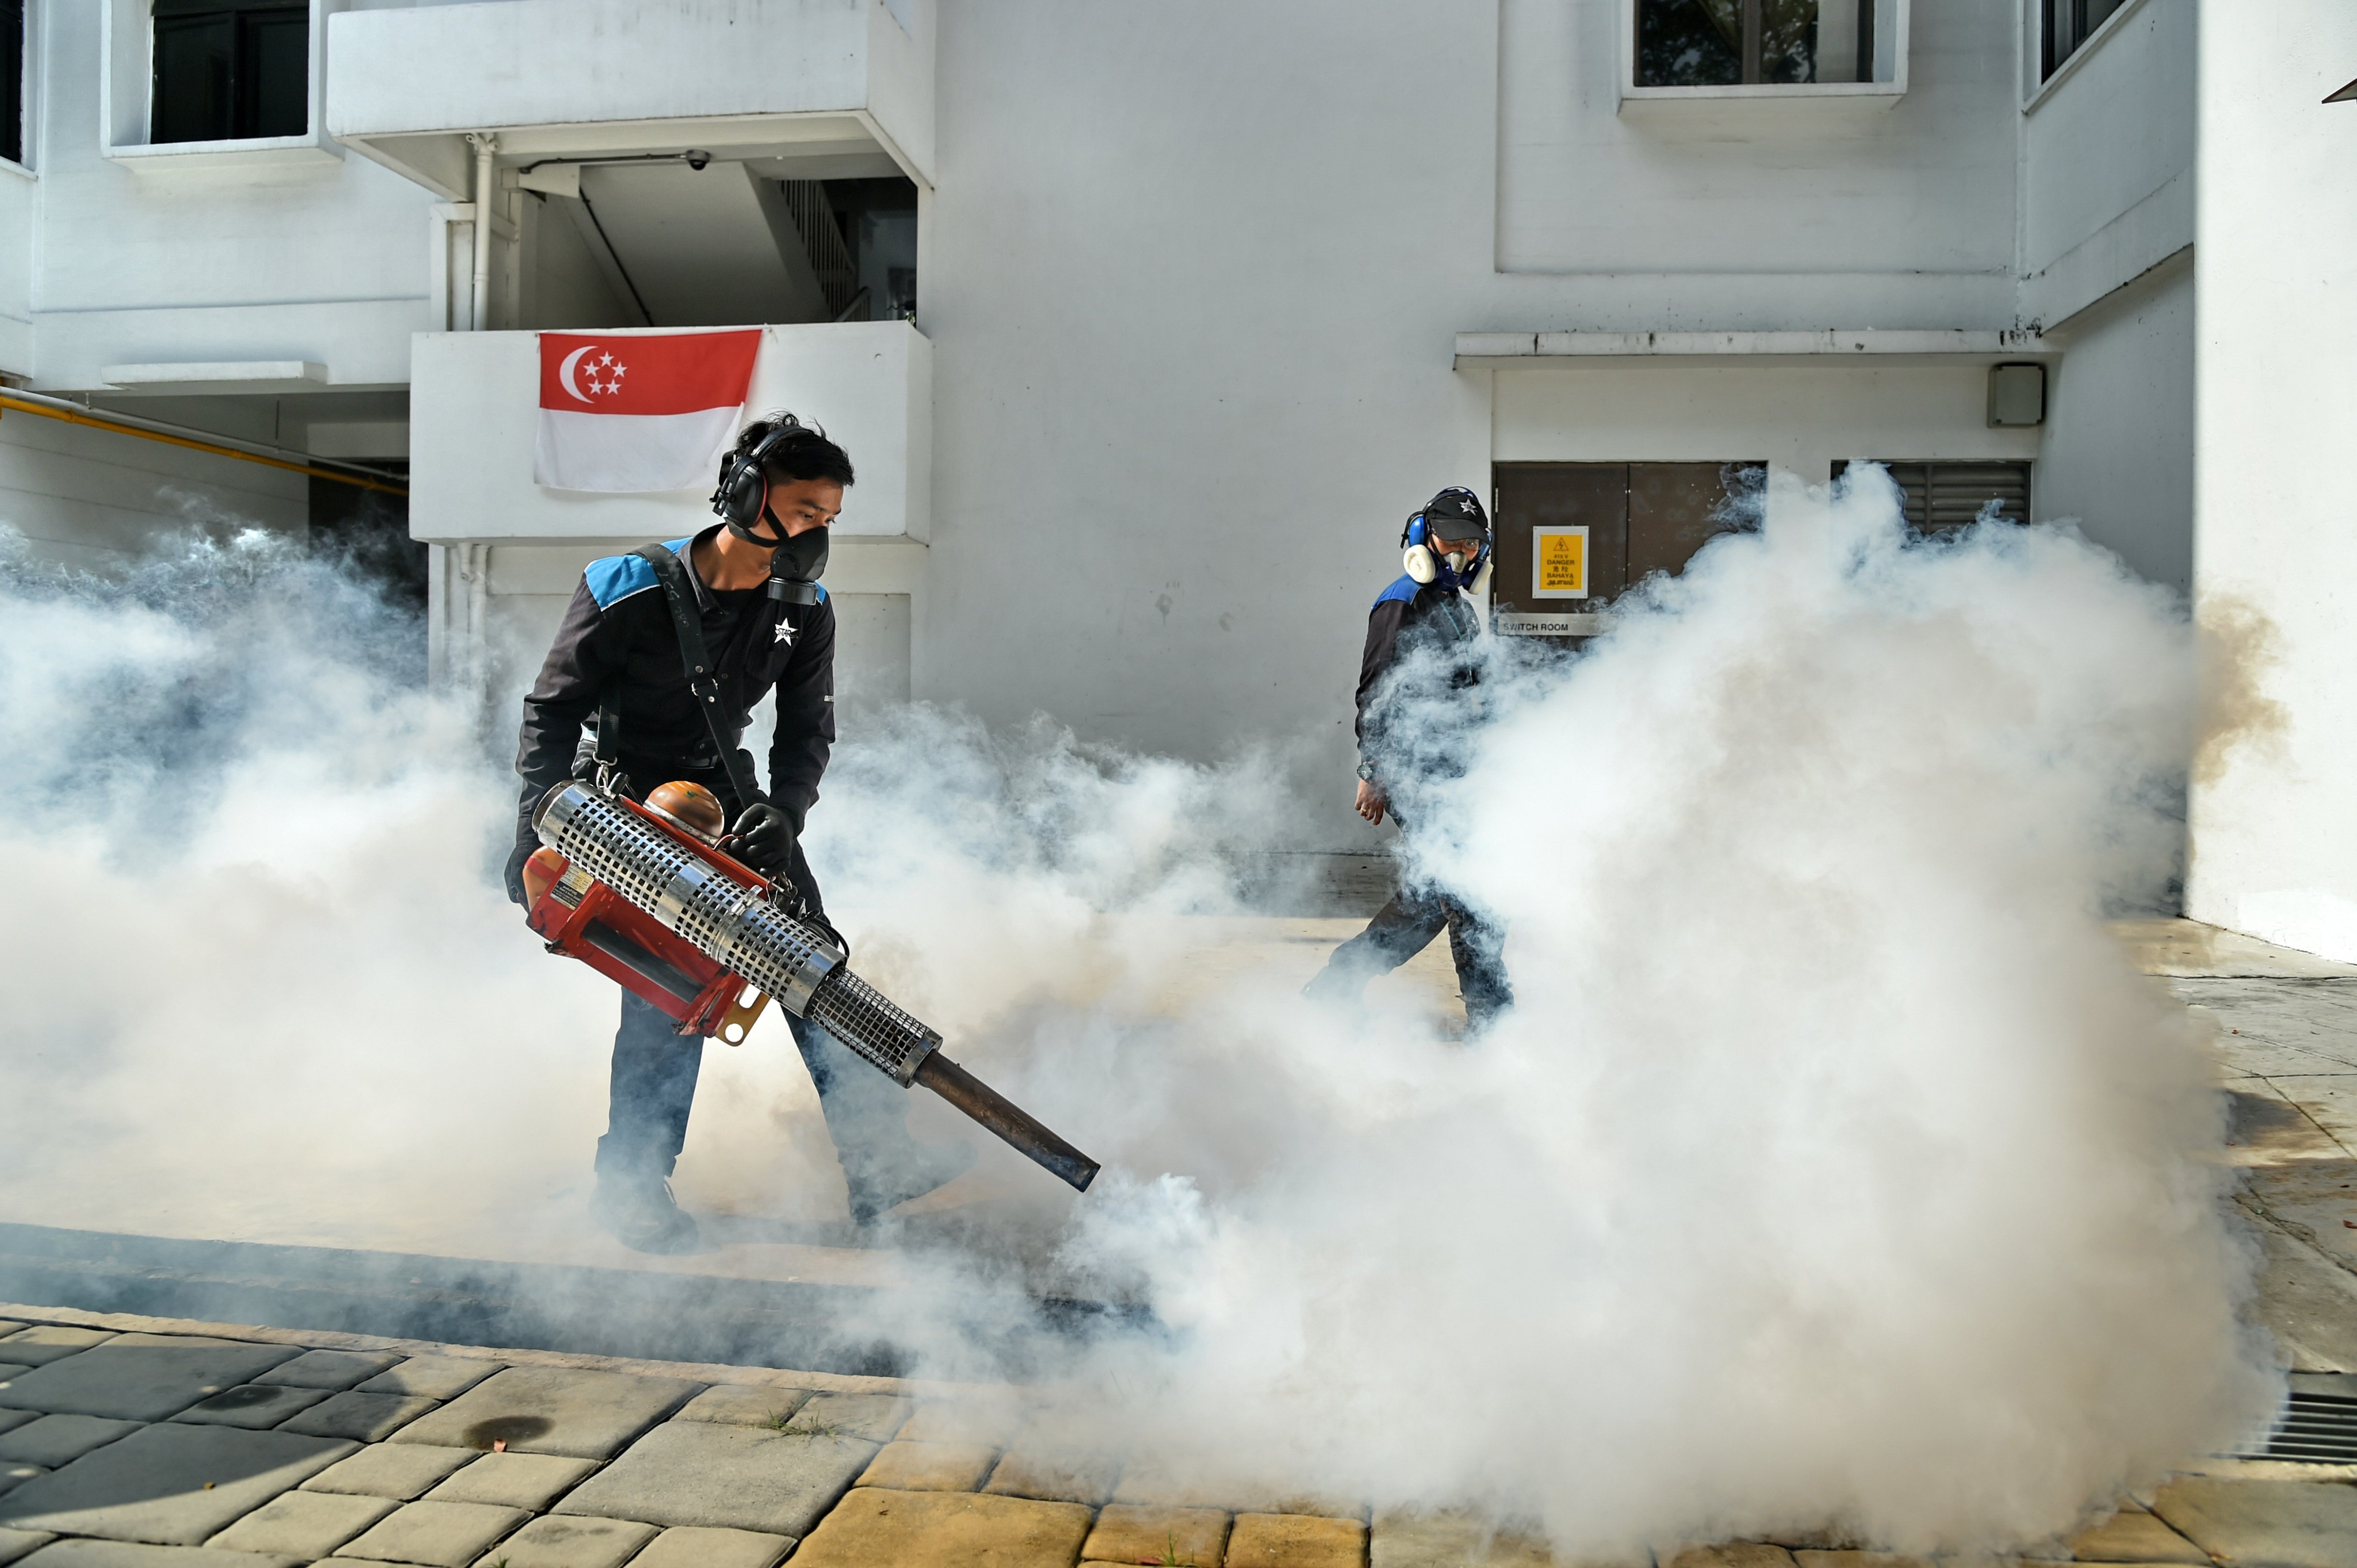 Pest control staff fumigate the drainage at the Macpherson neighbourhood housing estate in Singapore on August 31, 2016. (ROSLAN RAHMAN—;AFP/Getty Images)